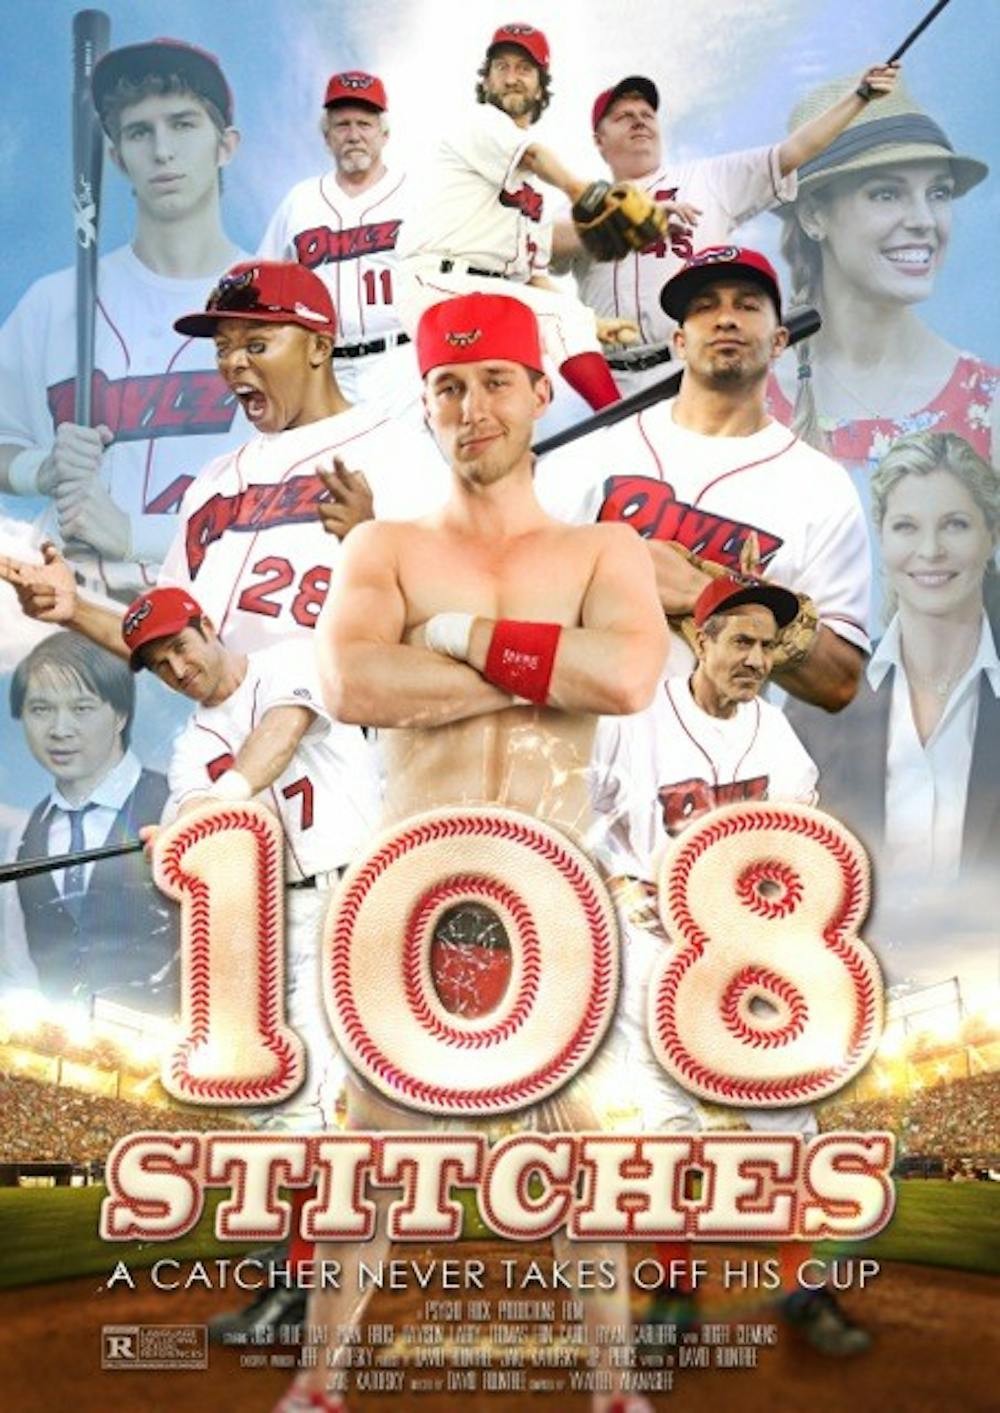 108-montage-poster